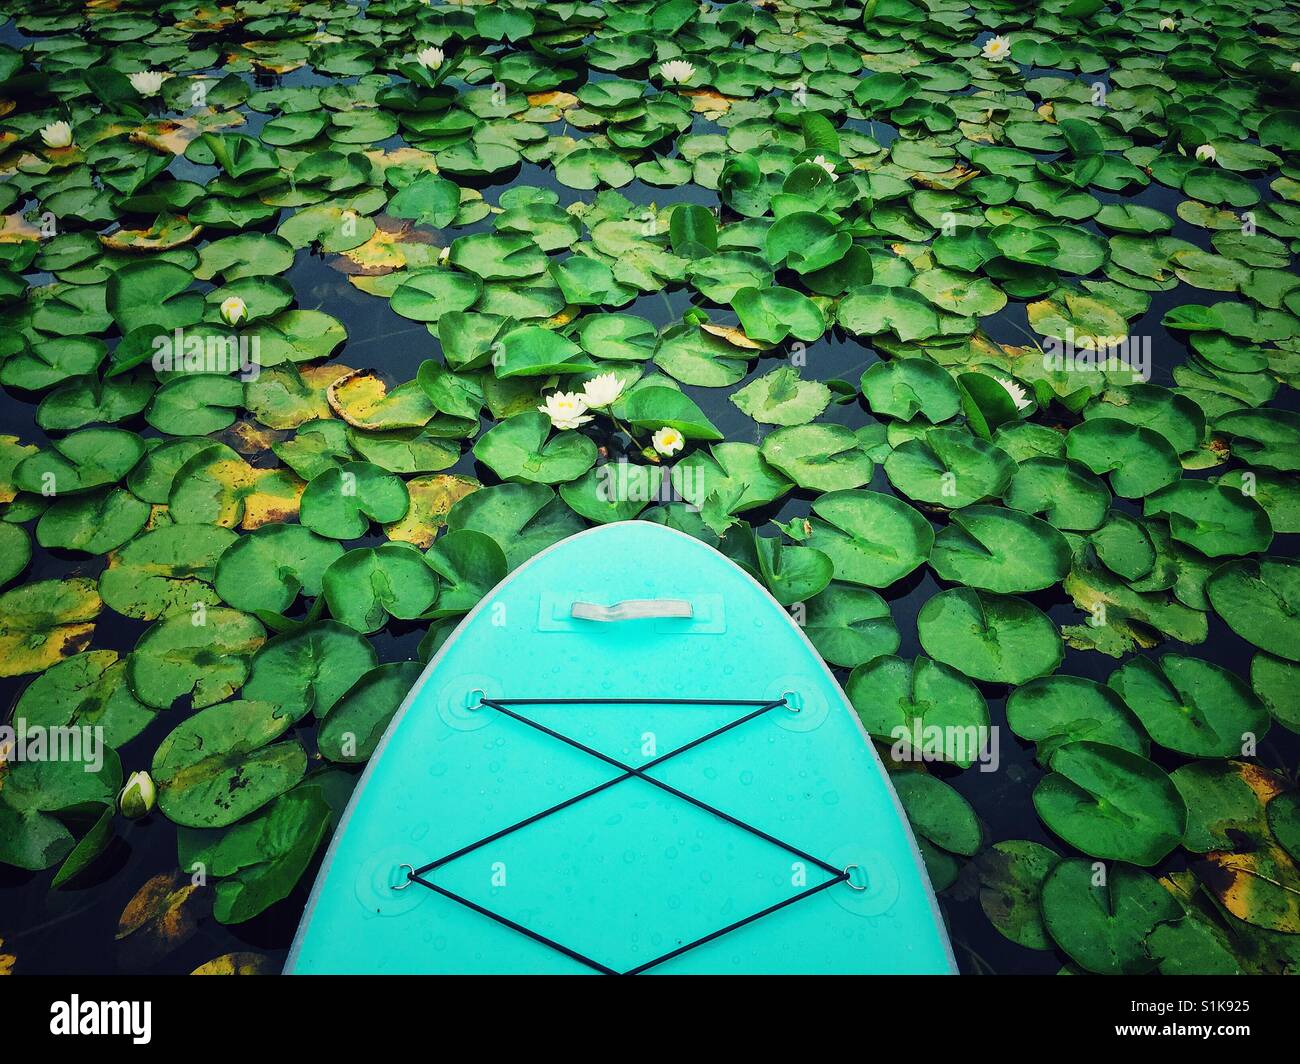 Paddleboard in lily pond Stock Photo